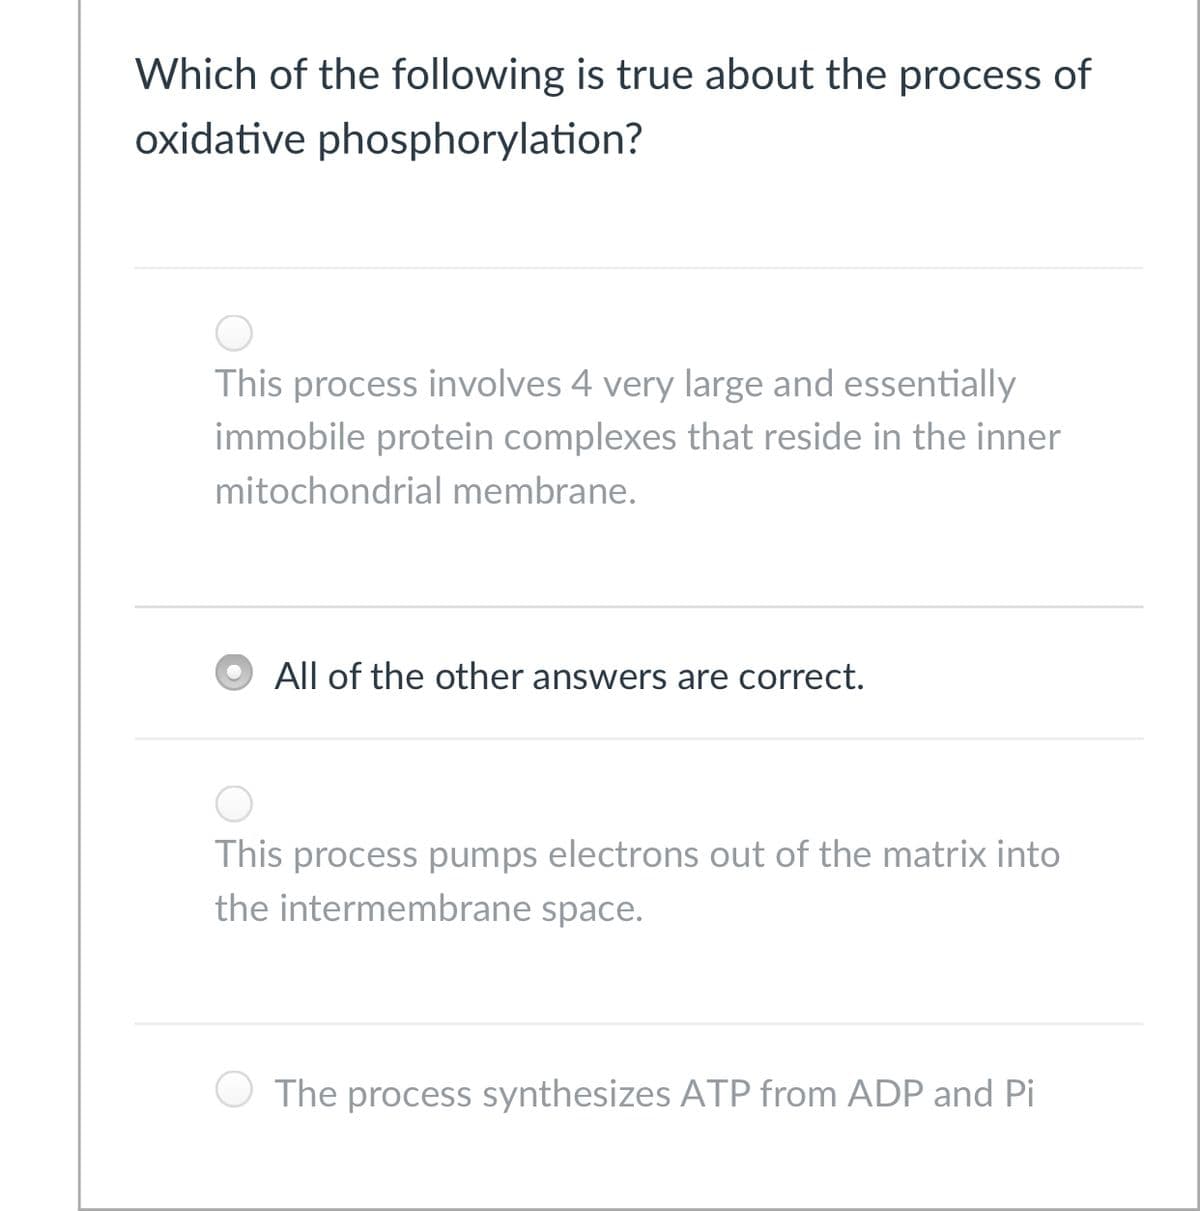 Which of the following is true about the process of
oxidative phosphorylation?
This process involves 4 very large and essentially
immobile protein complexes that reside in the inner
mitochondrial membrane.
All of the other answers are correct.
This process pumps electrons out of the matrix into
the intermembrane space.
The process synthesizes ATP from ADP and Pi
